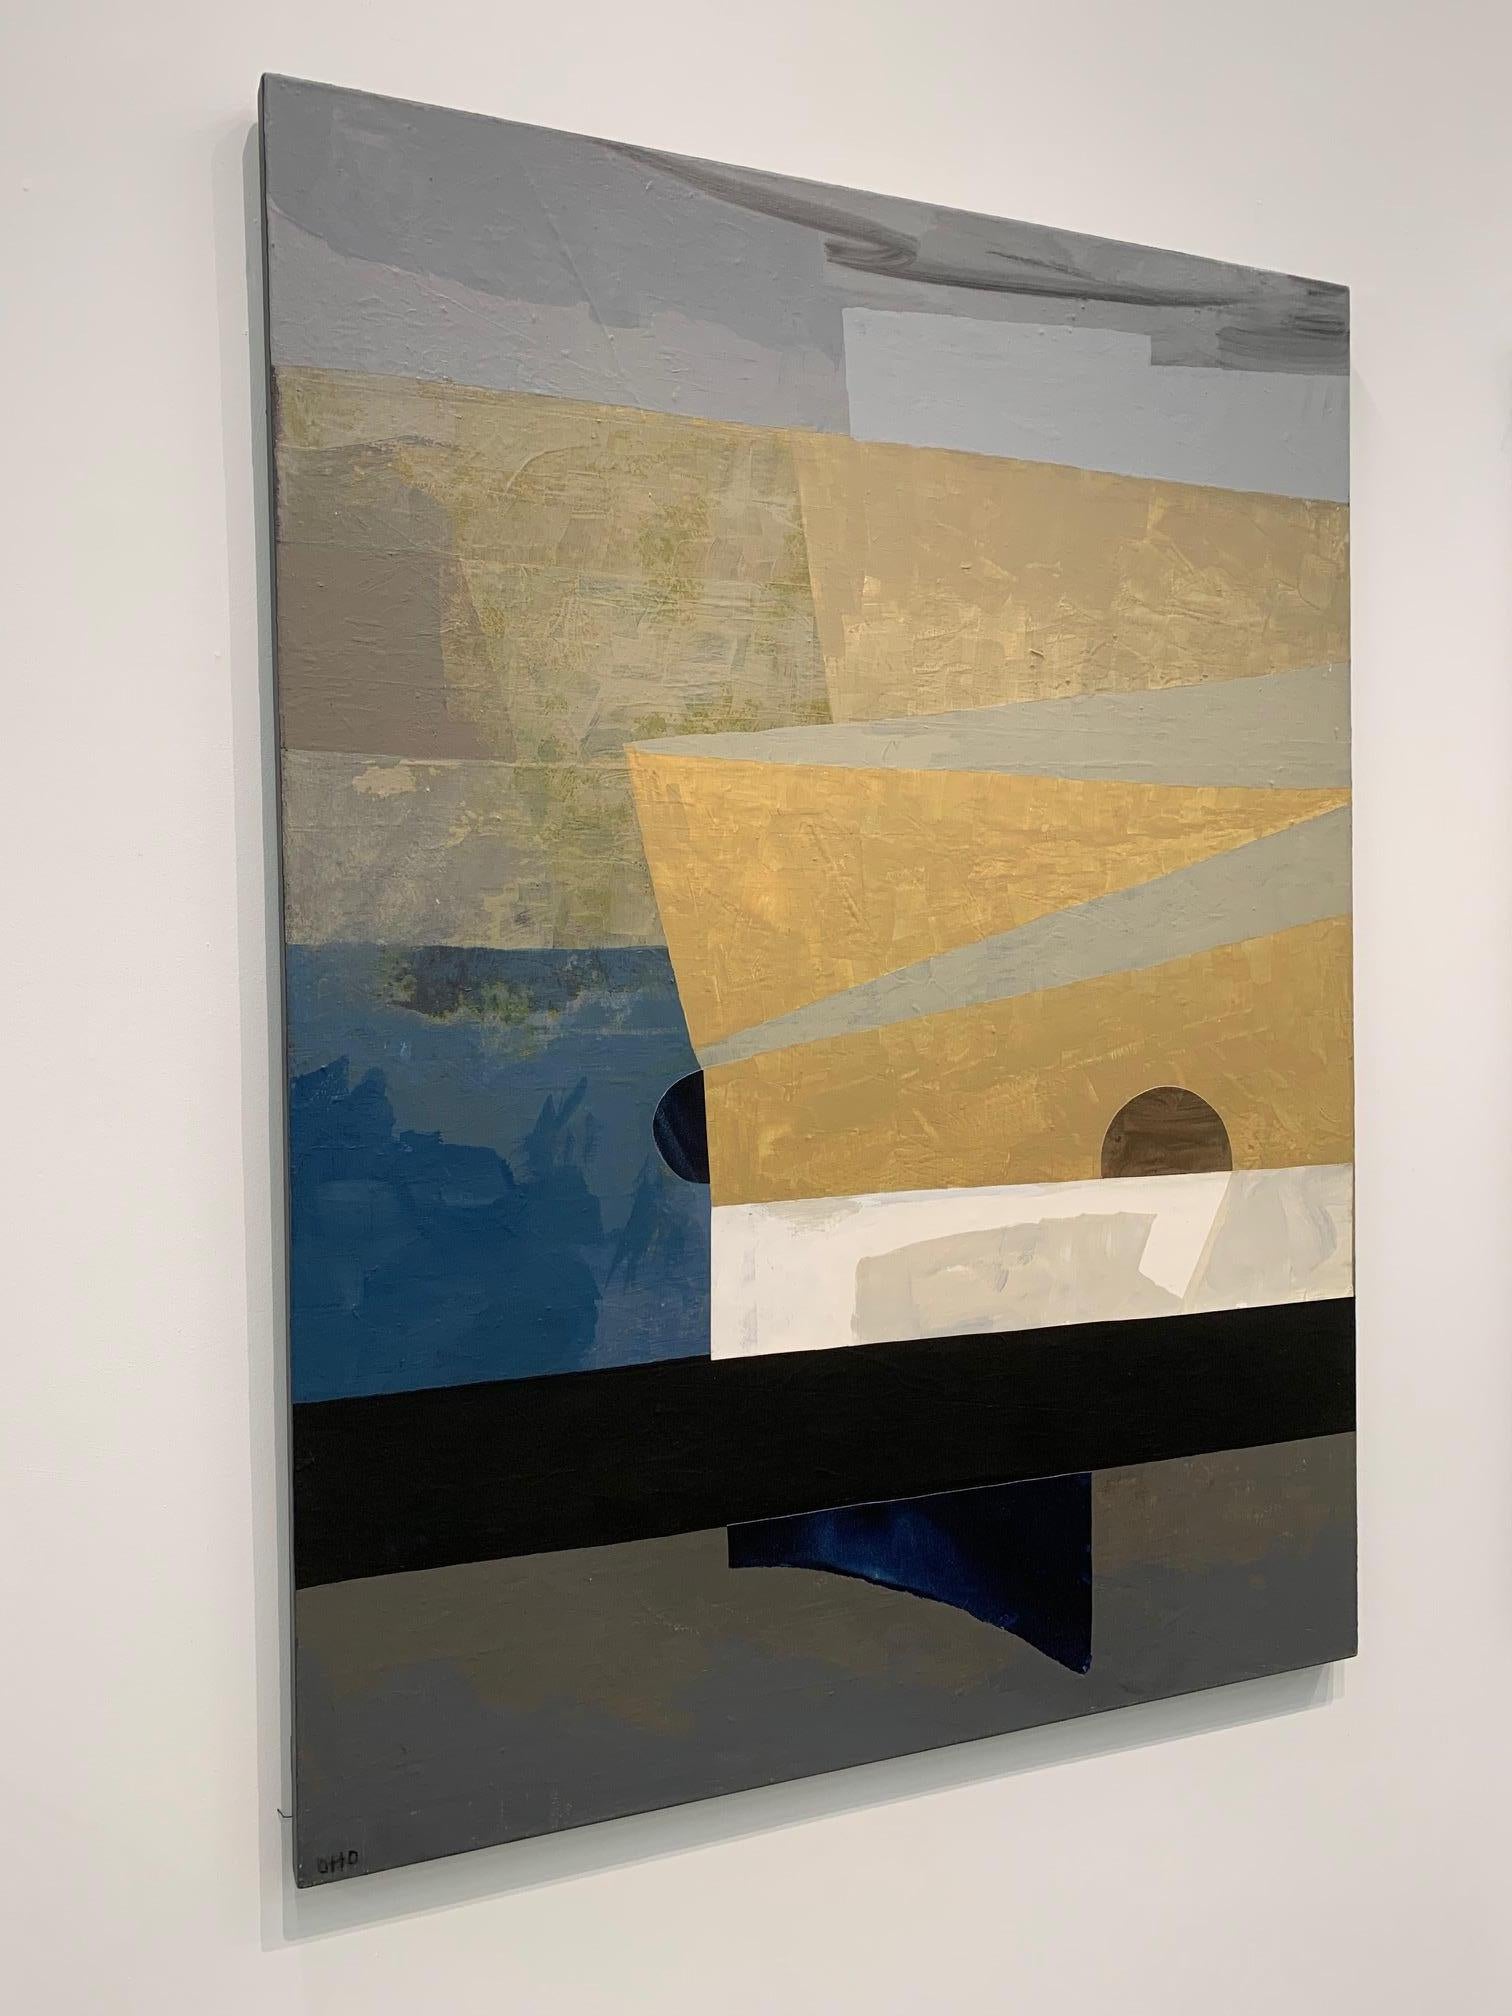 This contemporary, abstract painting by Otto Rogers, depicts a geometric landscape using neutral colour tones.

Otto Rogers was born in 1935 in Kerrobert, Saskatchewan. He attended the Saskatchewan Teachers College (1954) and received a Bachelor of